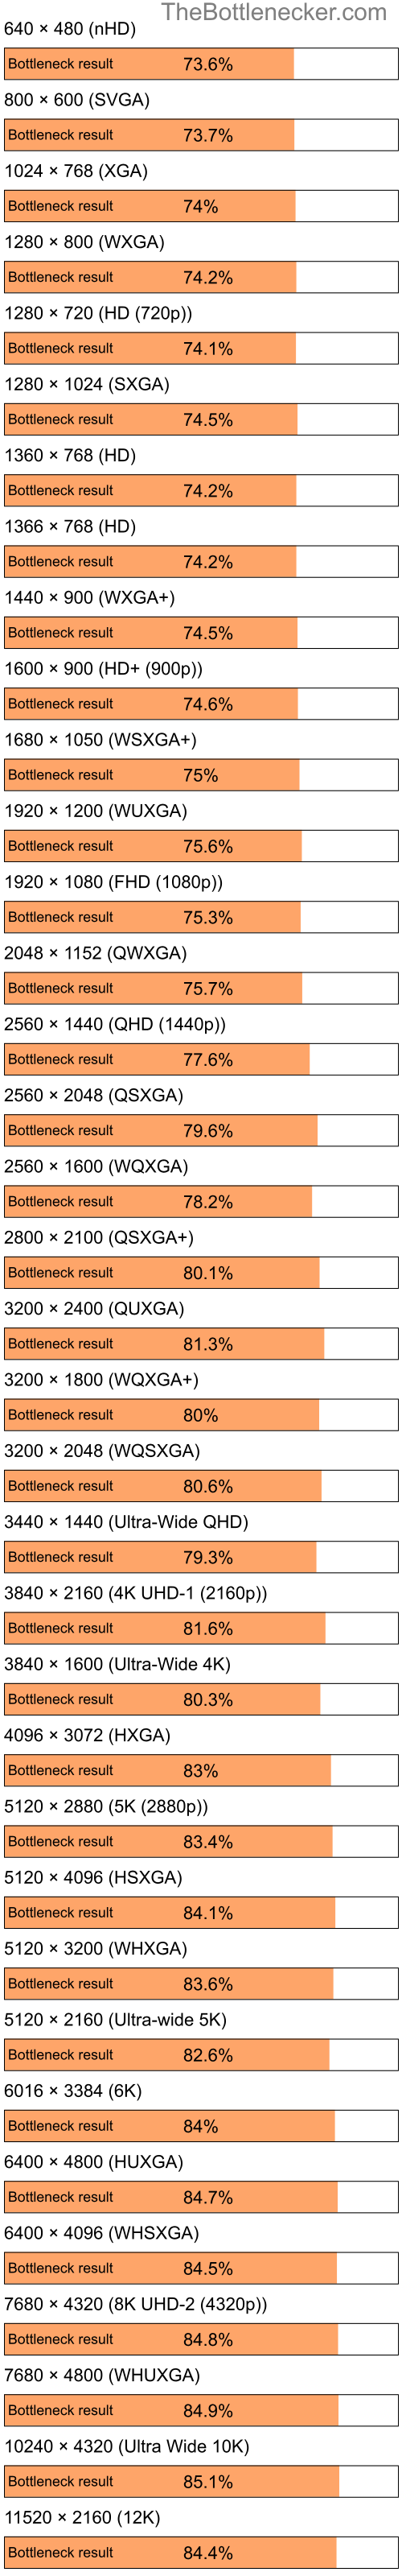 Bottleneck results by resolution for Intel Pentium 4 and AMD Mobility Radeon X300 in General Tasks